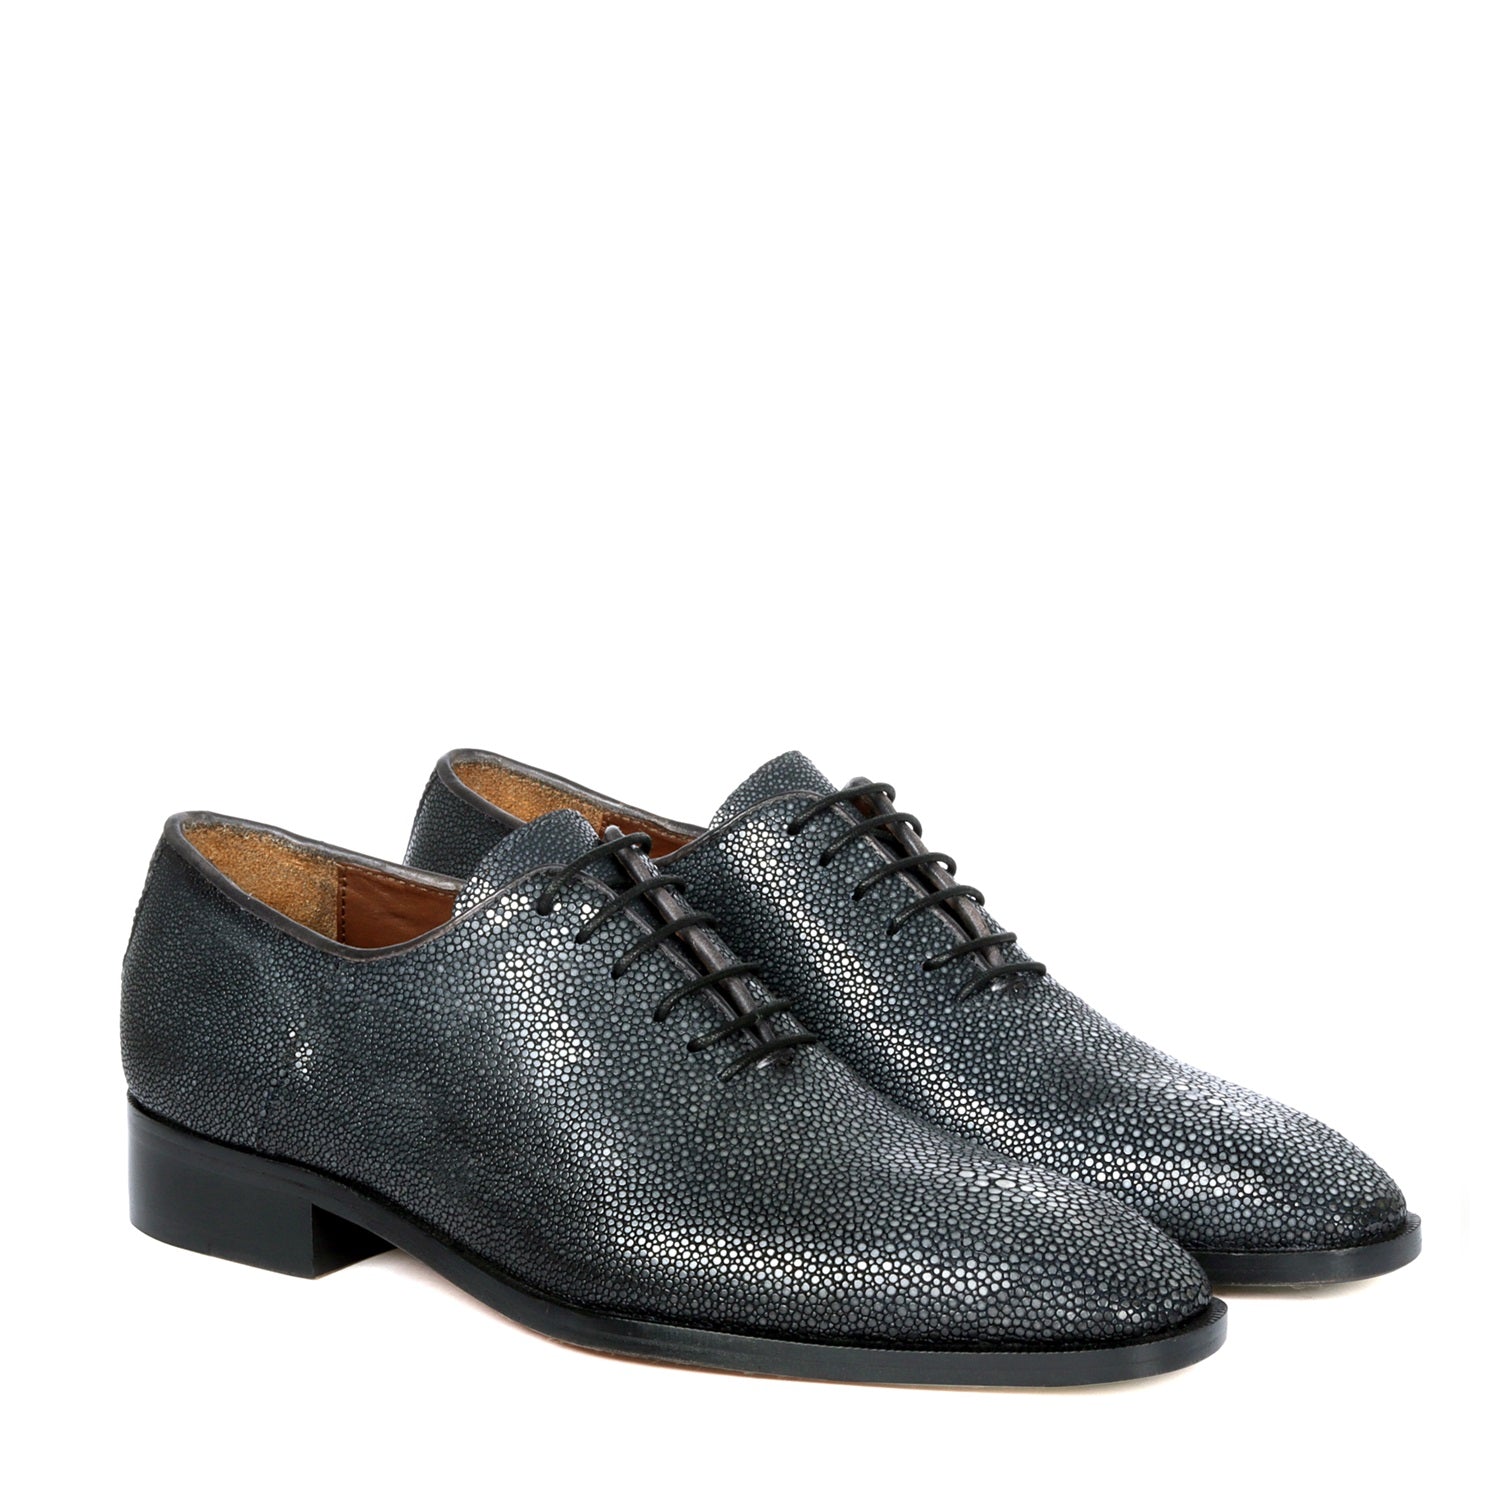 Exclusive Oxfords Lace-Up Formal Shoes in Stingray Fish Leather